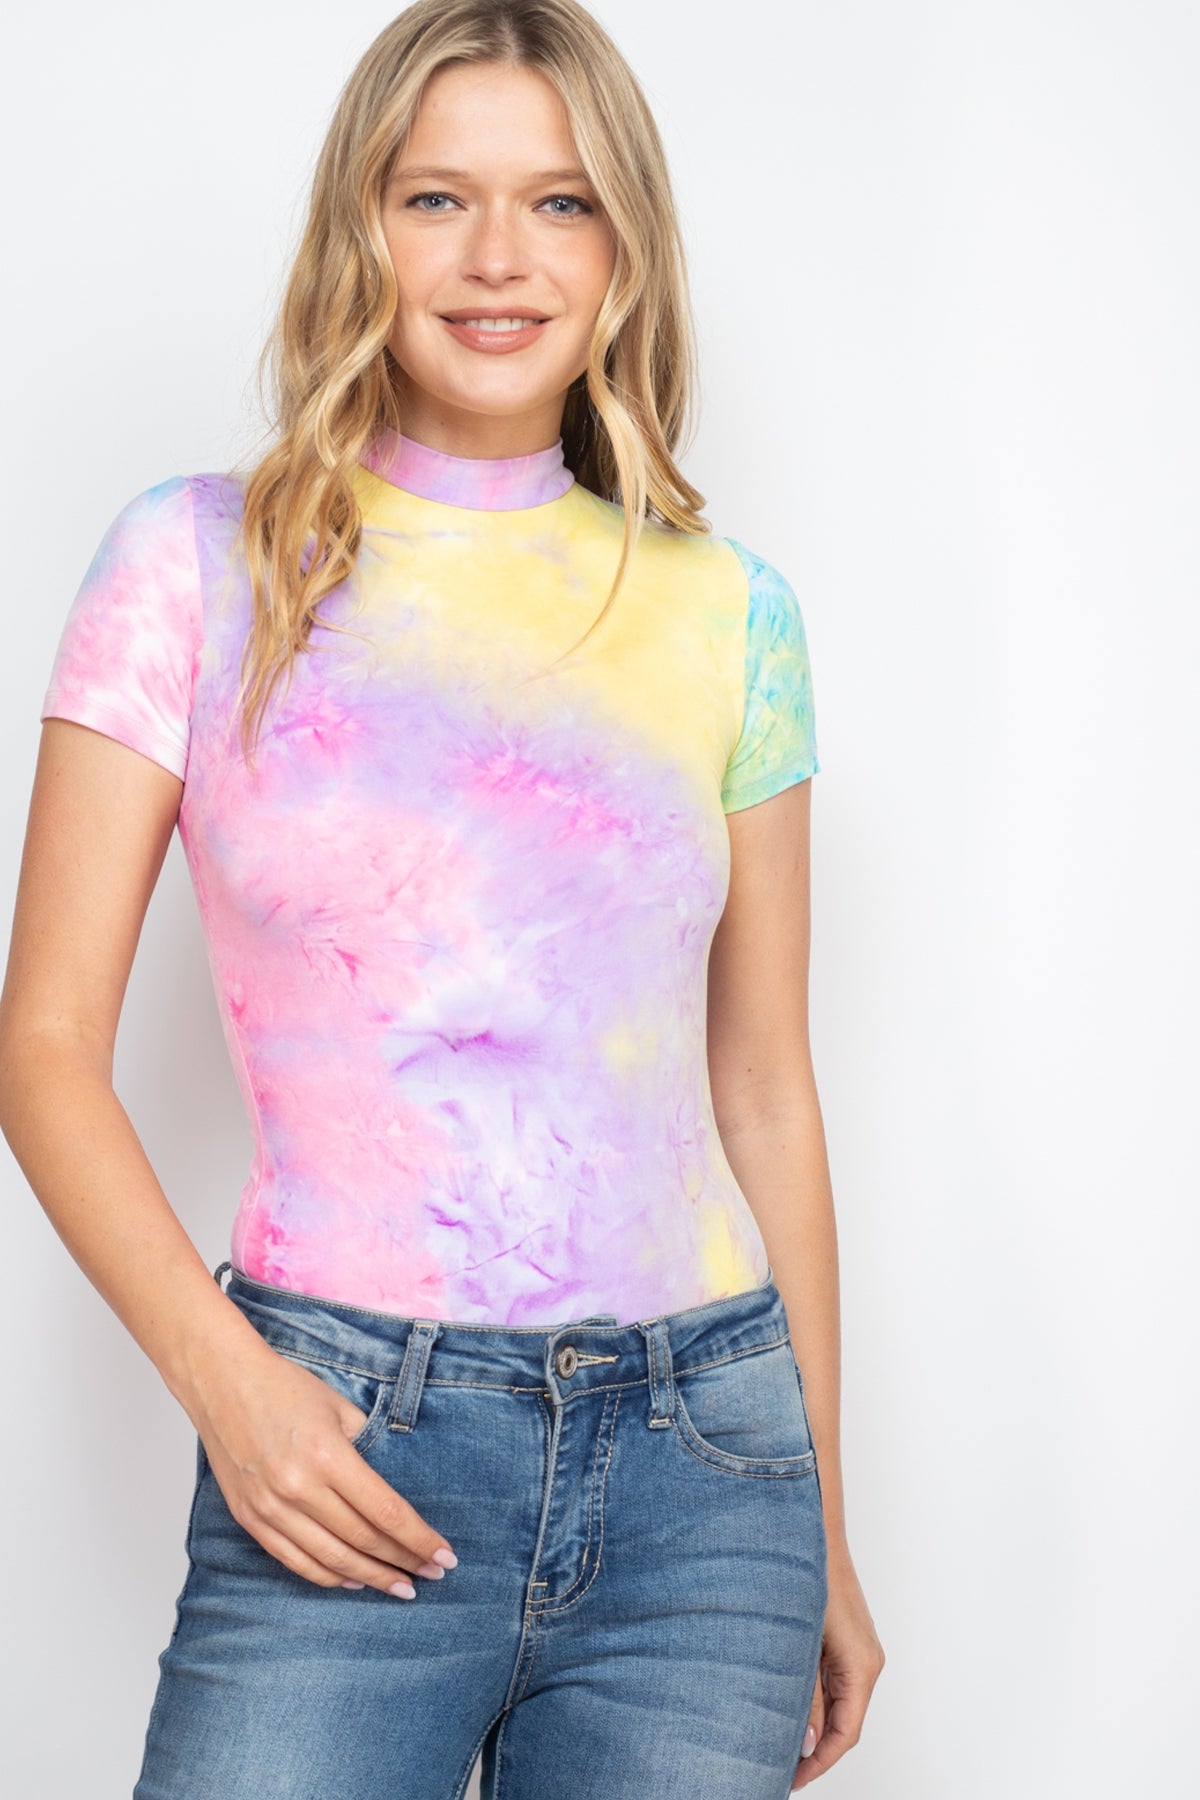 YELLOW PINK TIE DYE BODYSUIT (NOW $1.25 ONLY!)